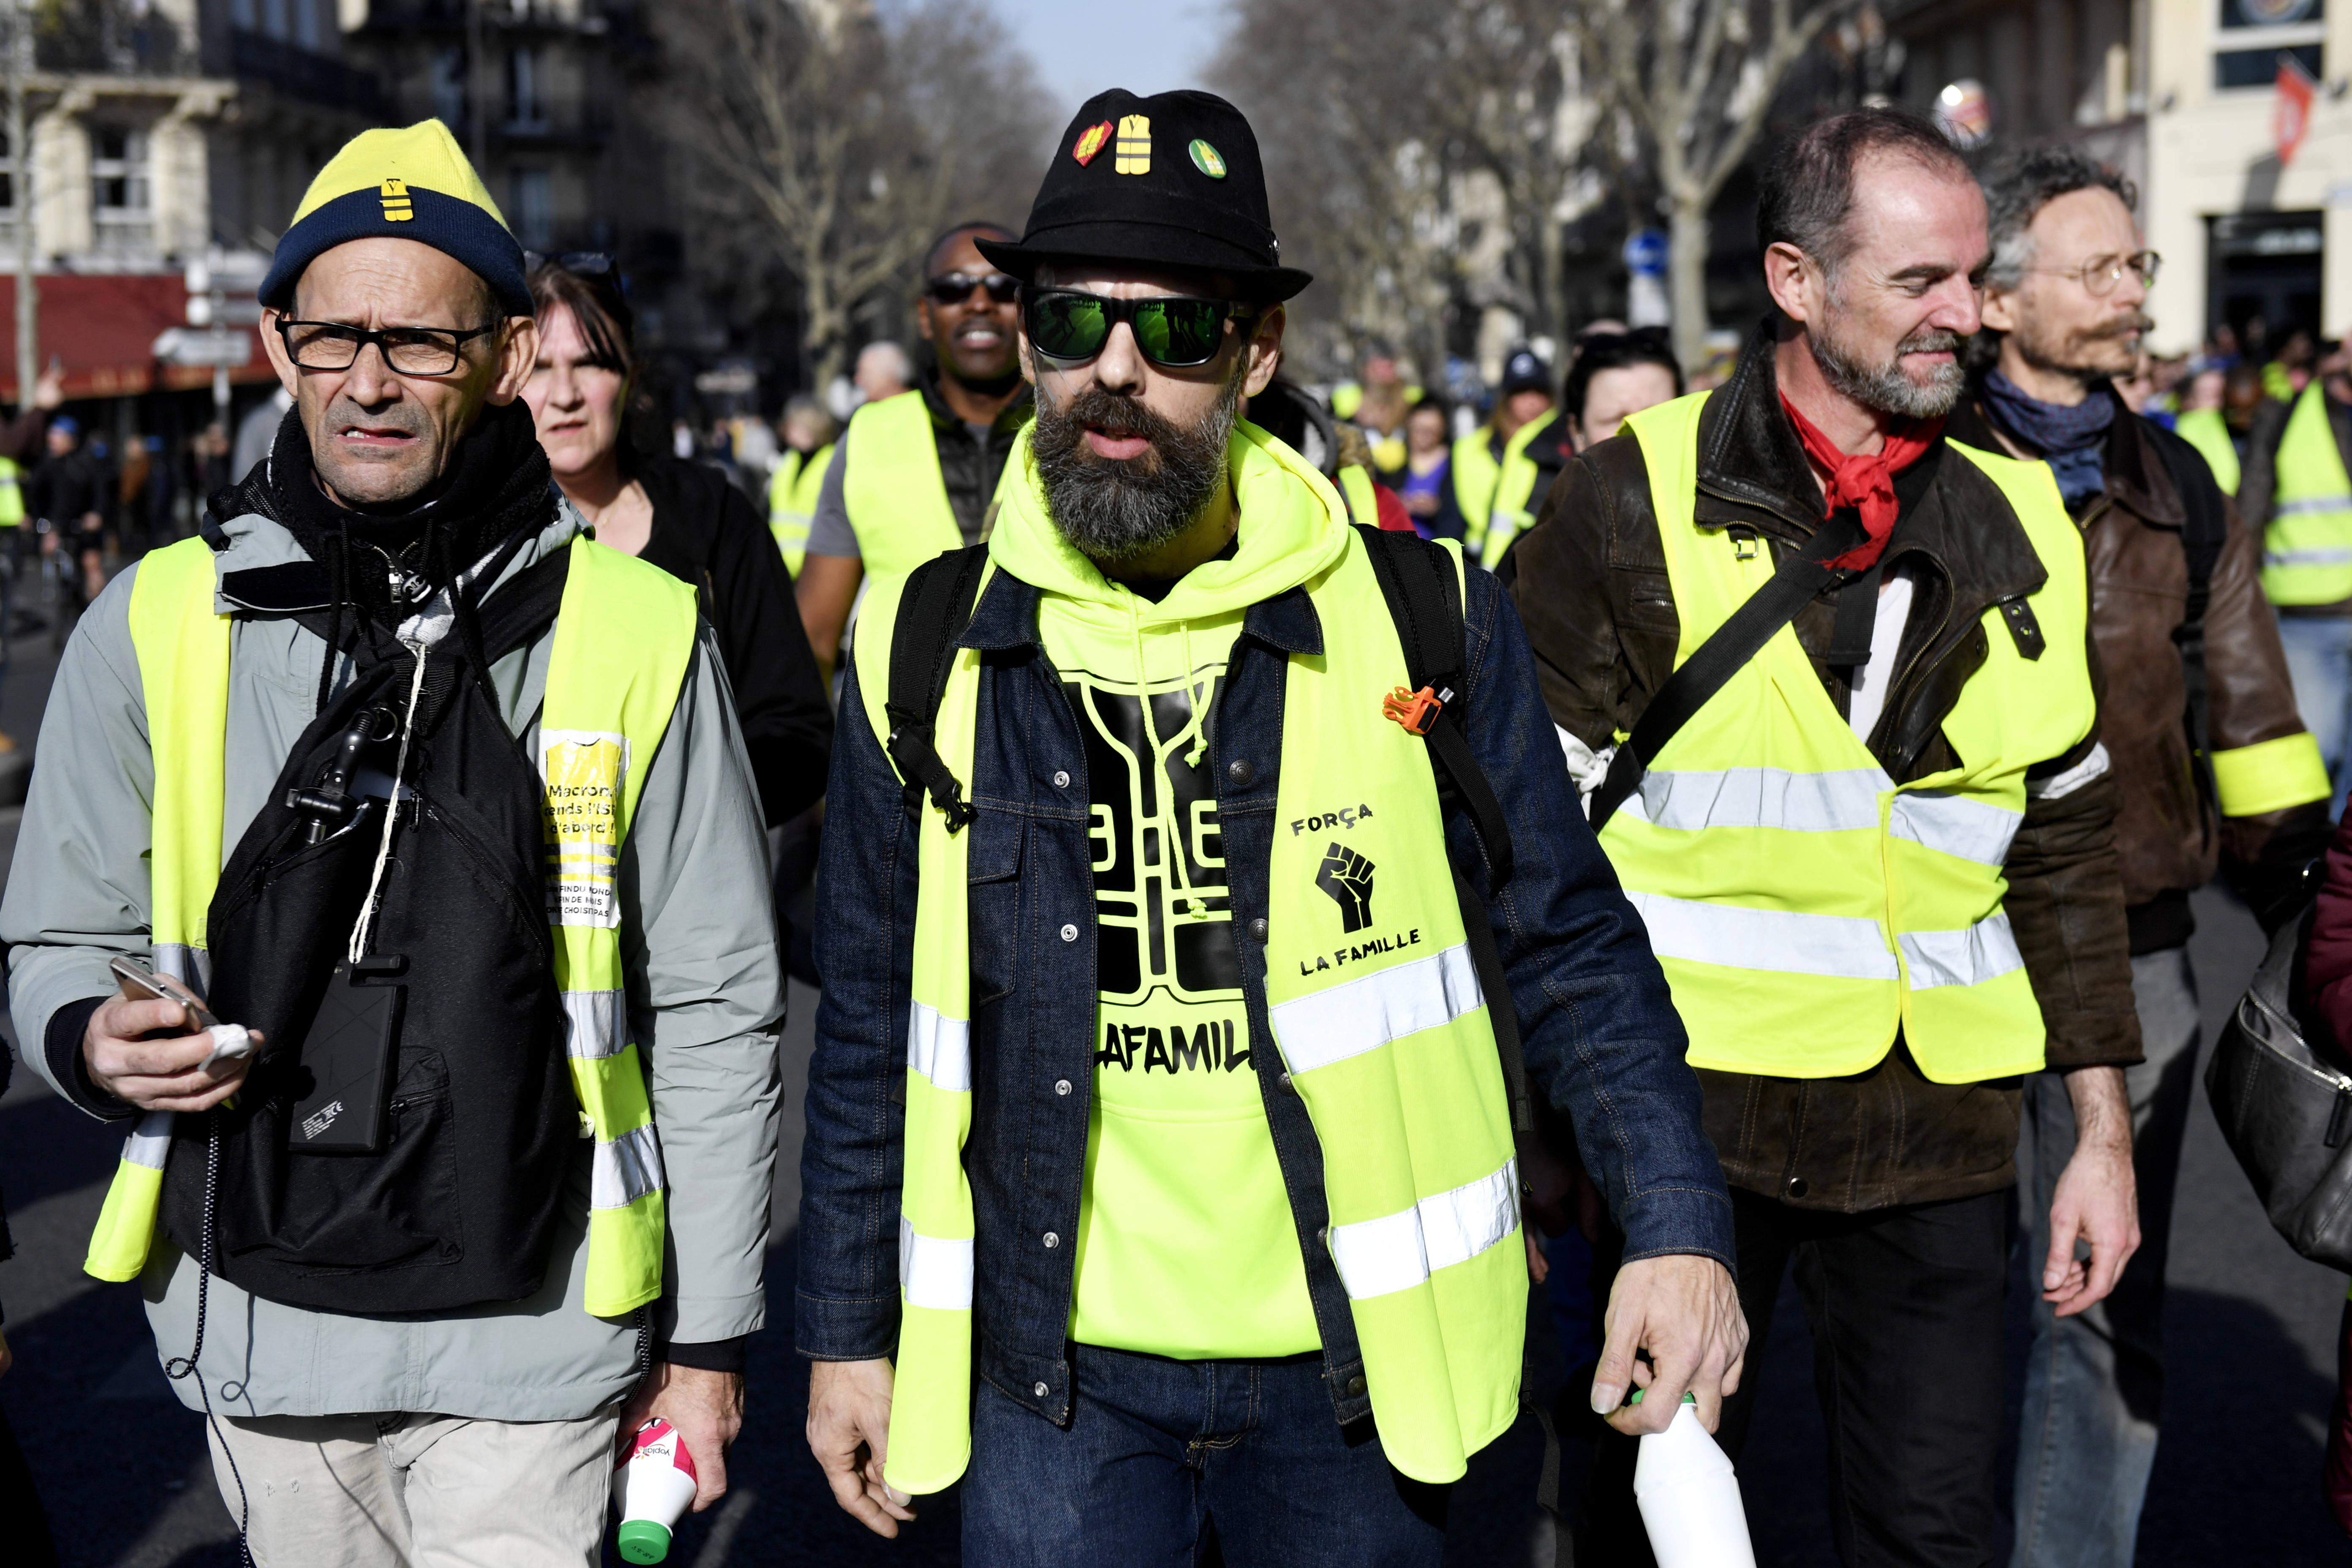 epa07374684 French activist Jerome Rodrigues (C) from the 'Gilets Jaunes' (Yellow Vests) movement participates in the 'Act XIV' demonstration (the 14th consecutive national protest on a Saturday) in Paris, France, 16 February 2019. The so-called 'Gilets Jaunes' is a grassroots protest movement with supporters from a wide span of the political spectrum, that originally started with protest across the nation in late 2018 against high fuel prices.  EPA/JULIEN DE ROSA